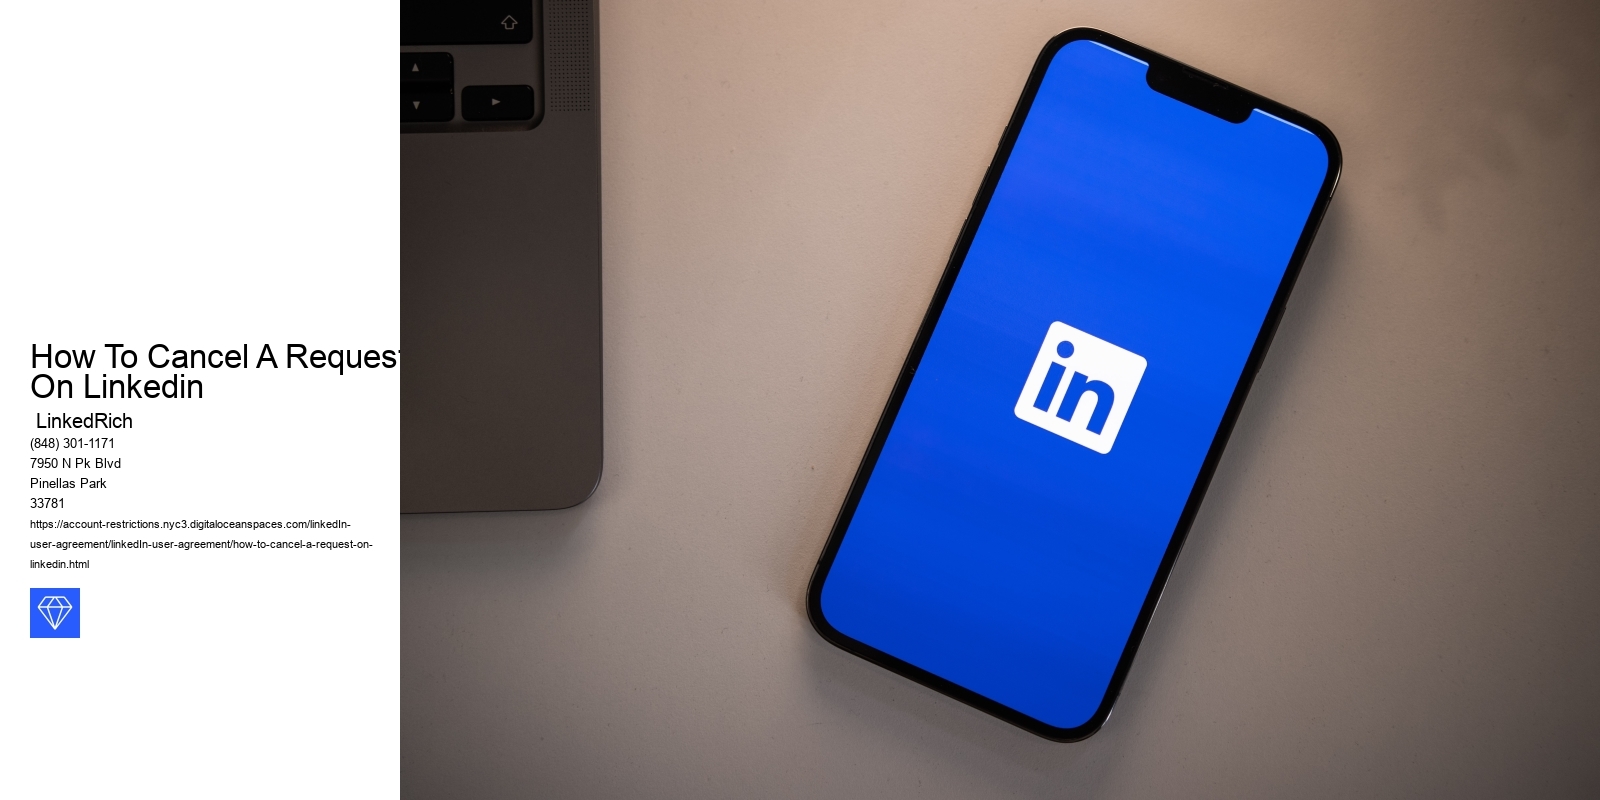 How To Cancel A Request On Linkedin